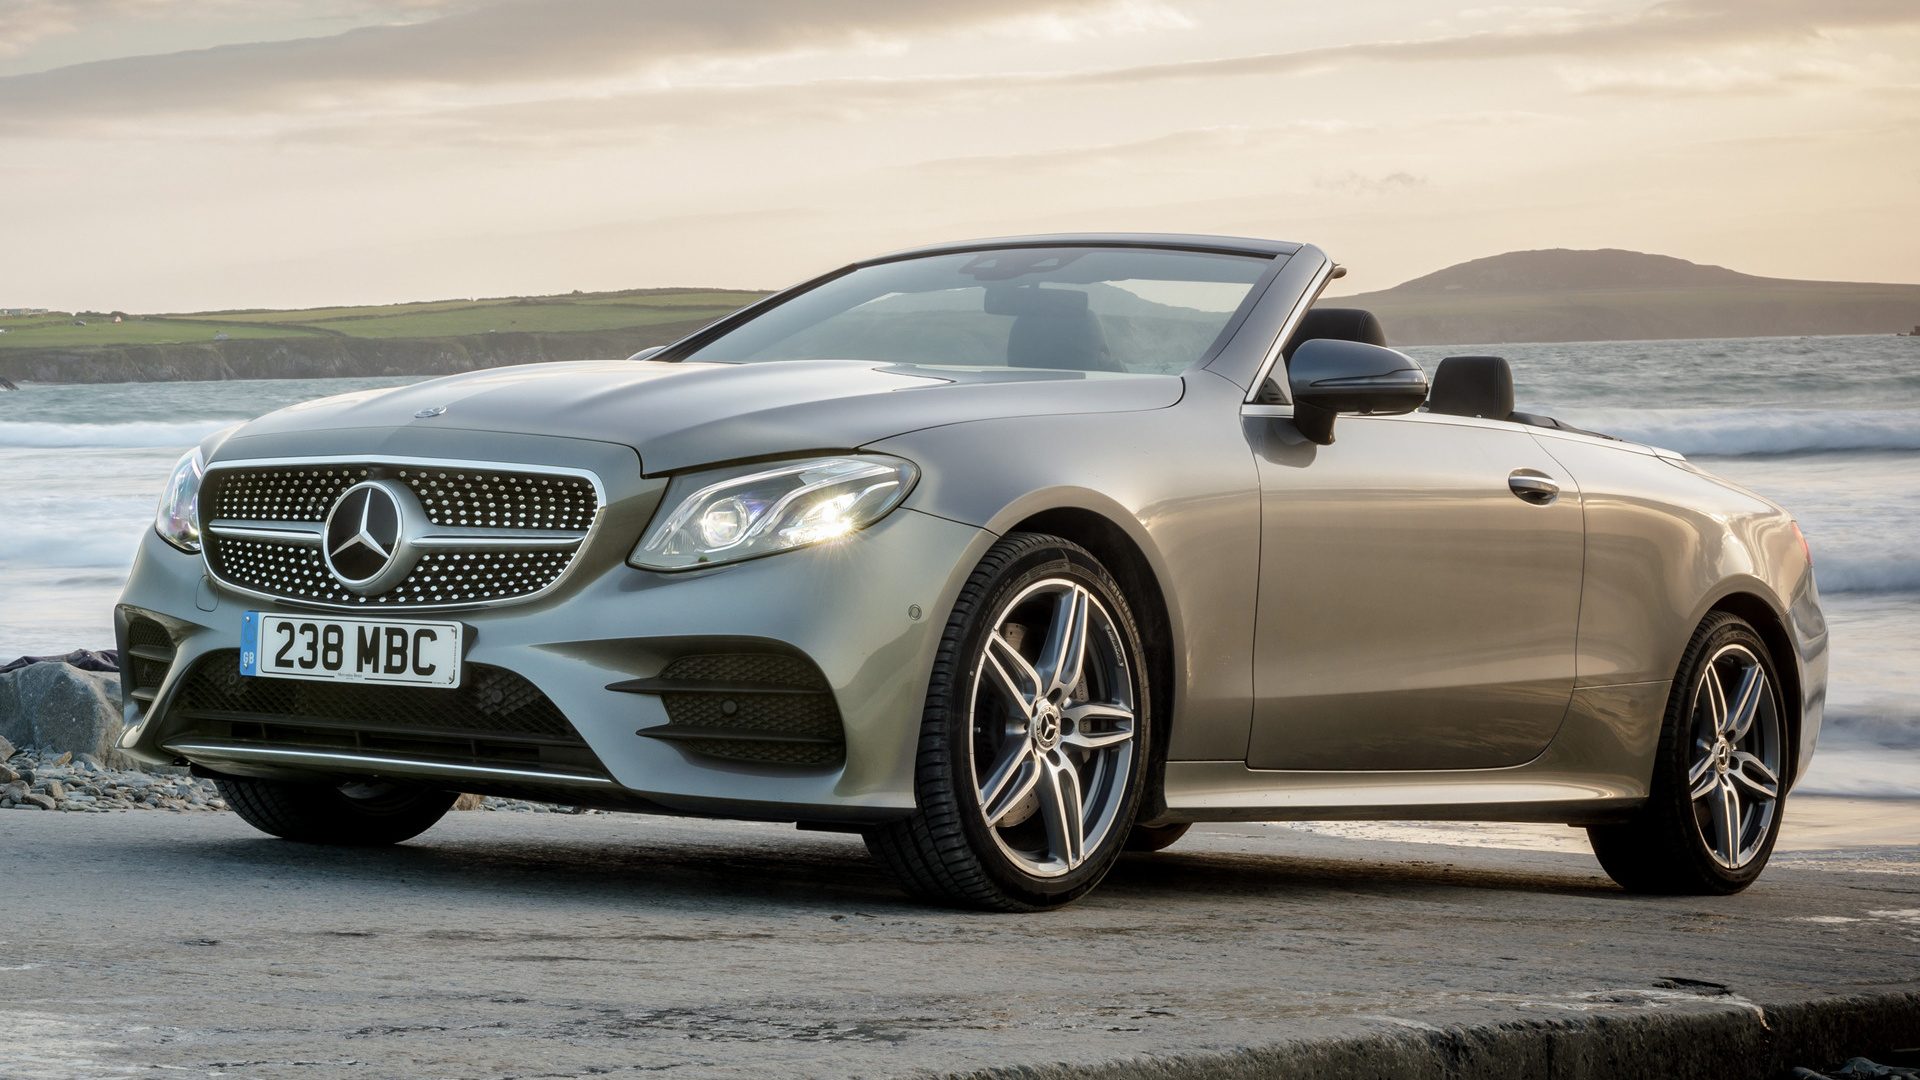 Mercedes-Benz E 400 4Matic Cabriolet Amg Styling Wallpapers